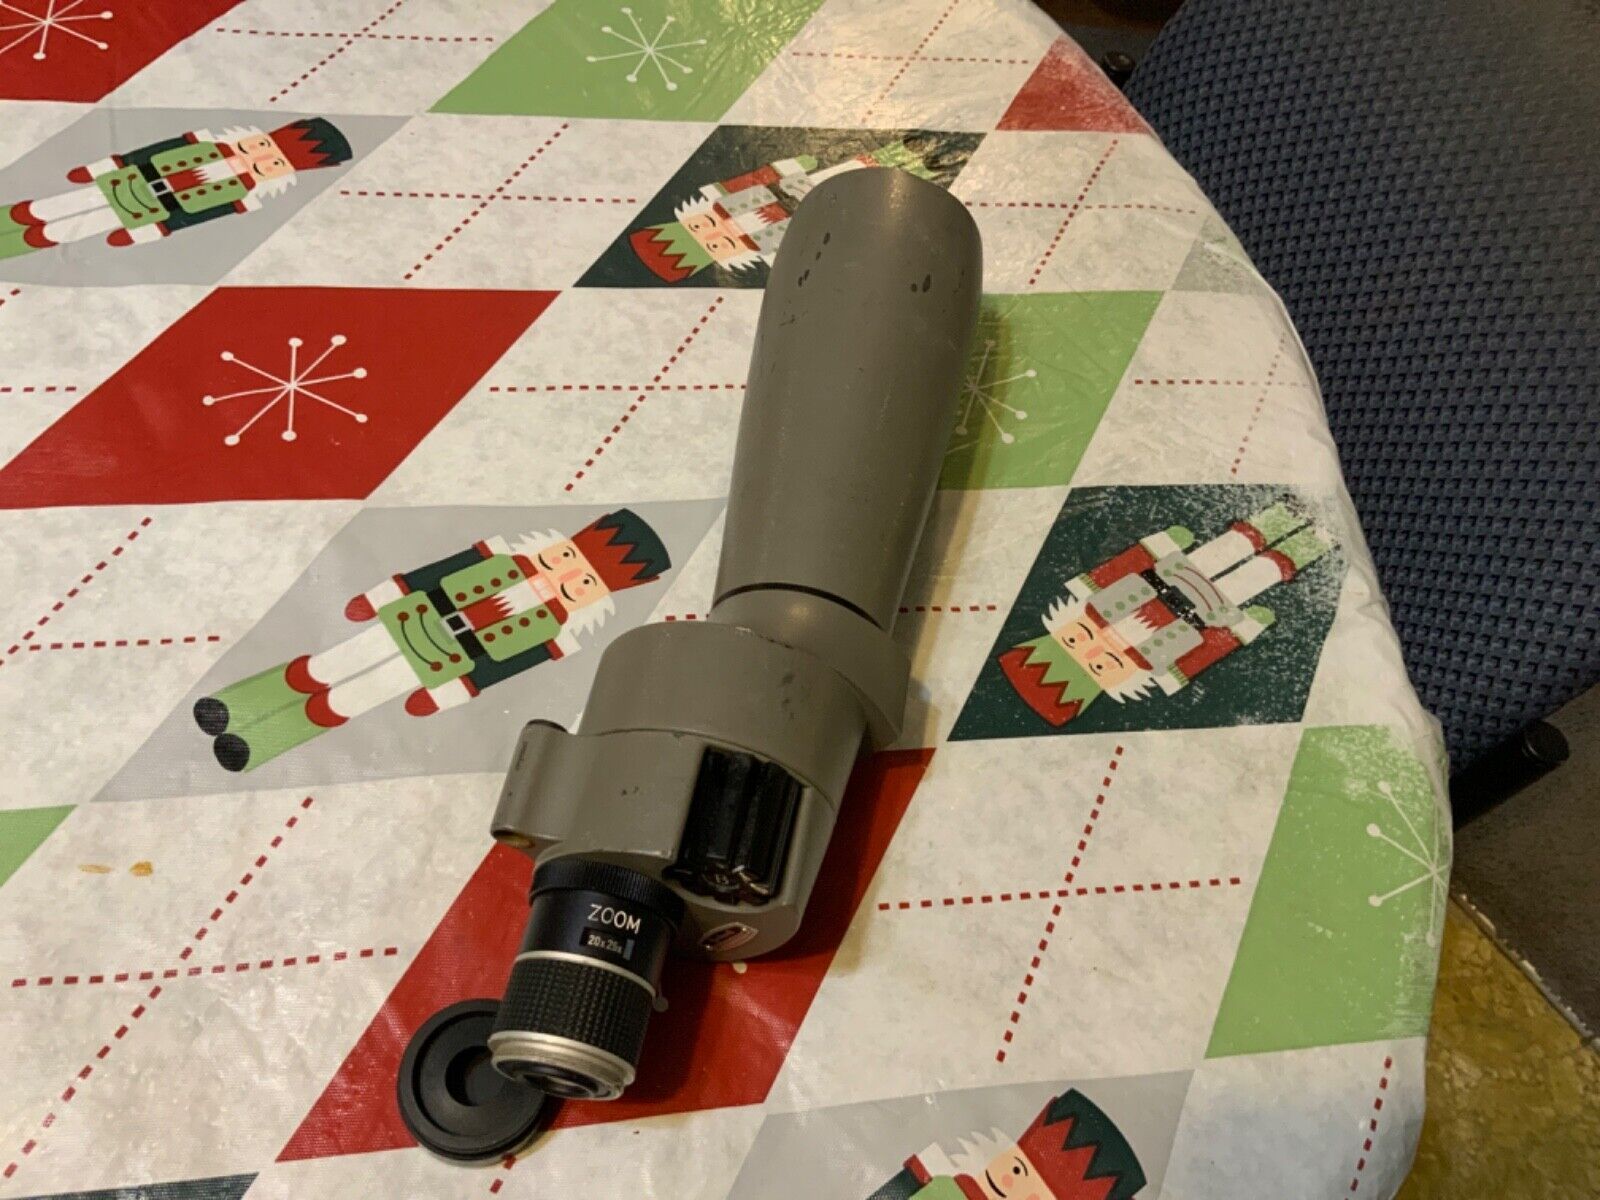 Bushnell  60mm Prismatic Telescope #78-4020 gray, used, some scratches.